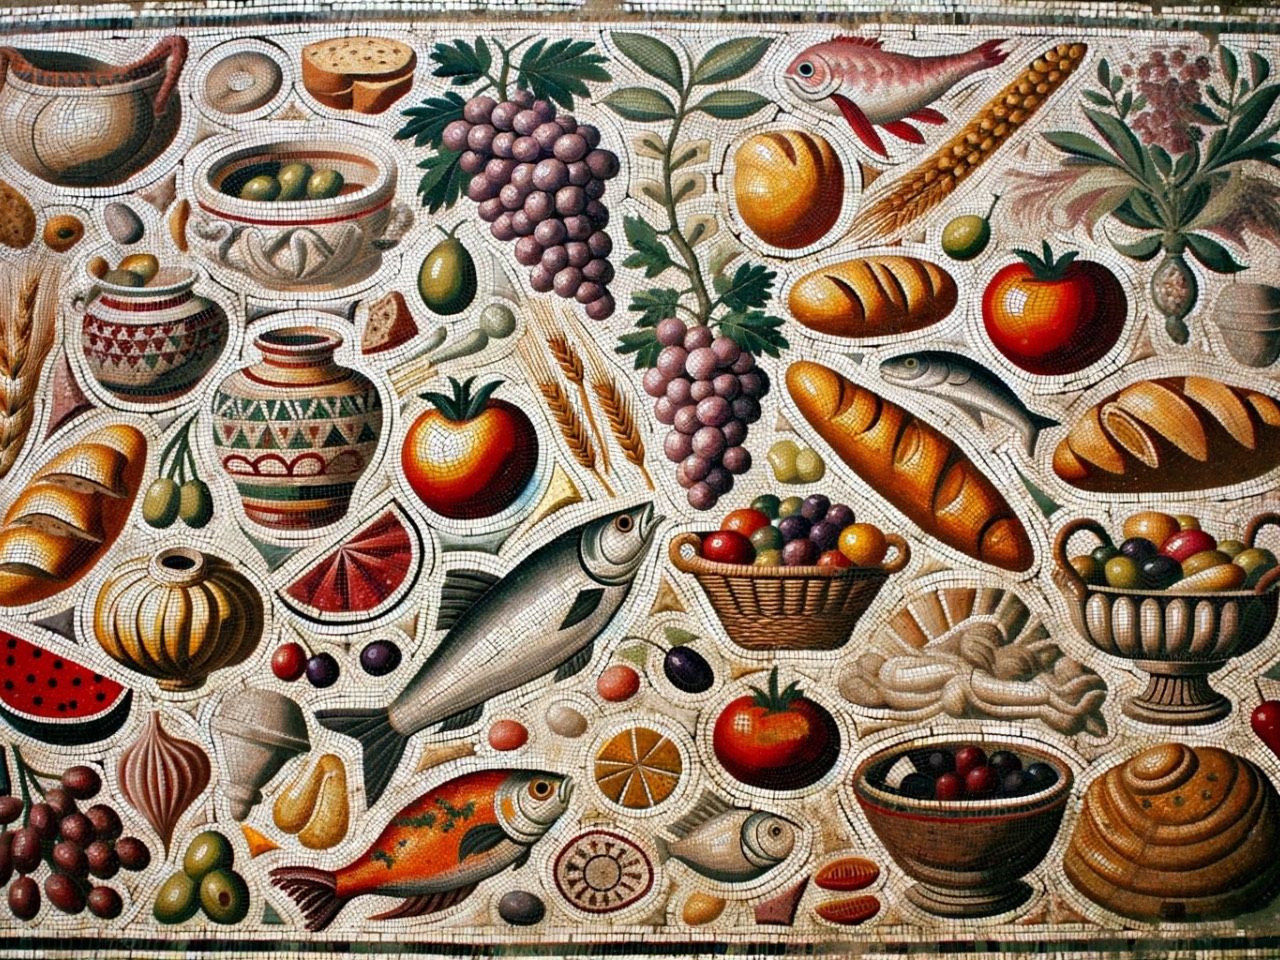 Ancient Roman mosaic art showcasing a variety of foods from the era, such as olives, grapes, bread, and fish, arranged intricately with tiny colored tiles. Image by DALL-E